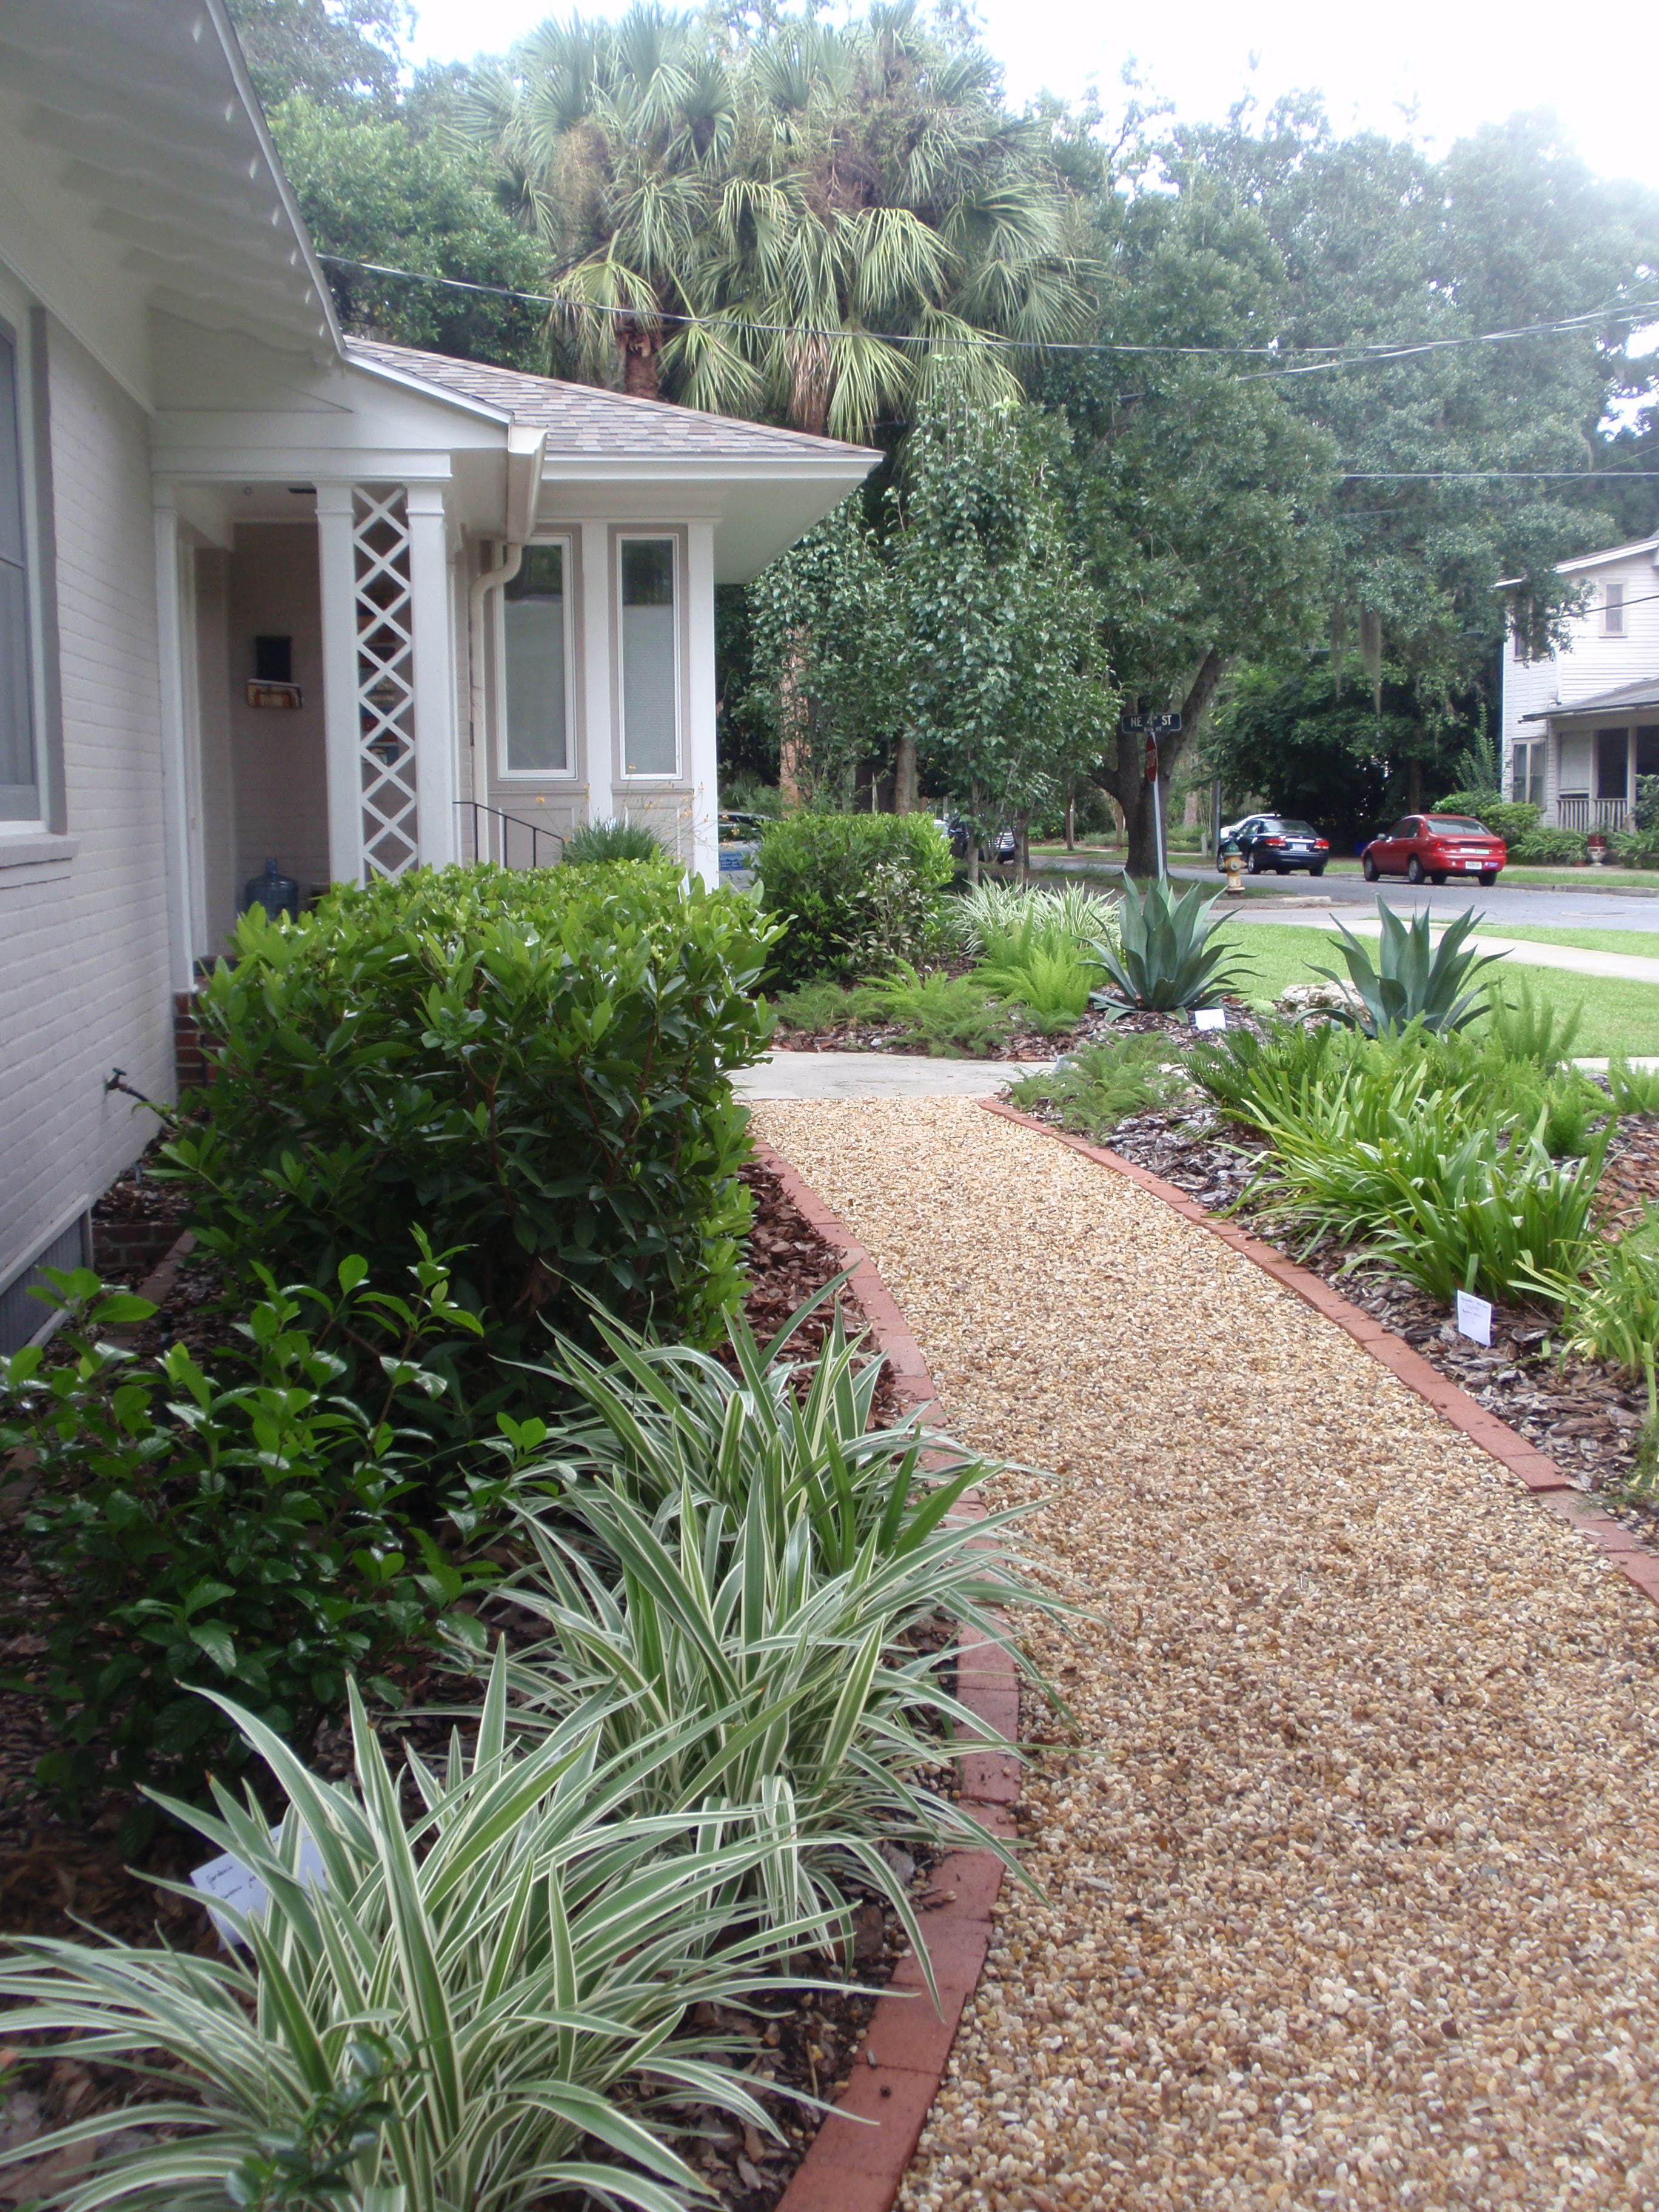 Example of a Florida Friendly lawn